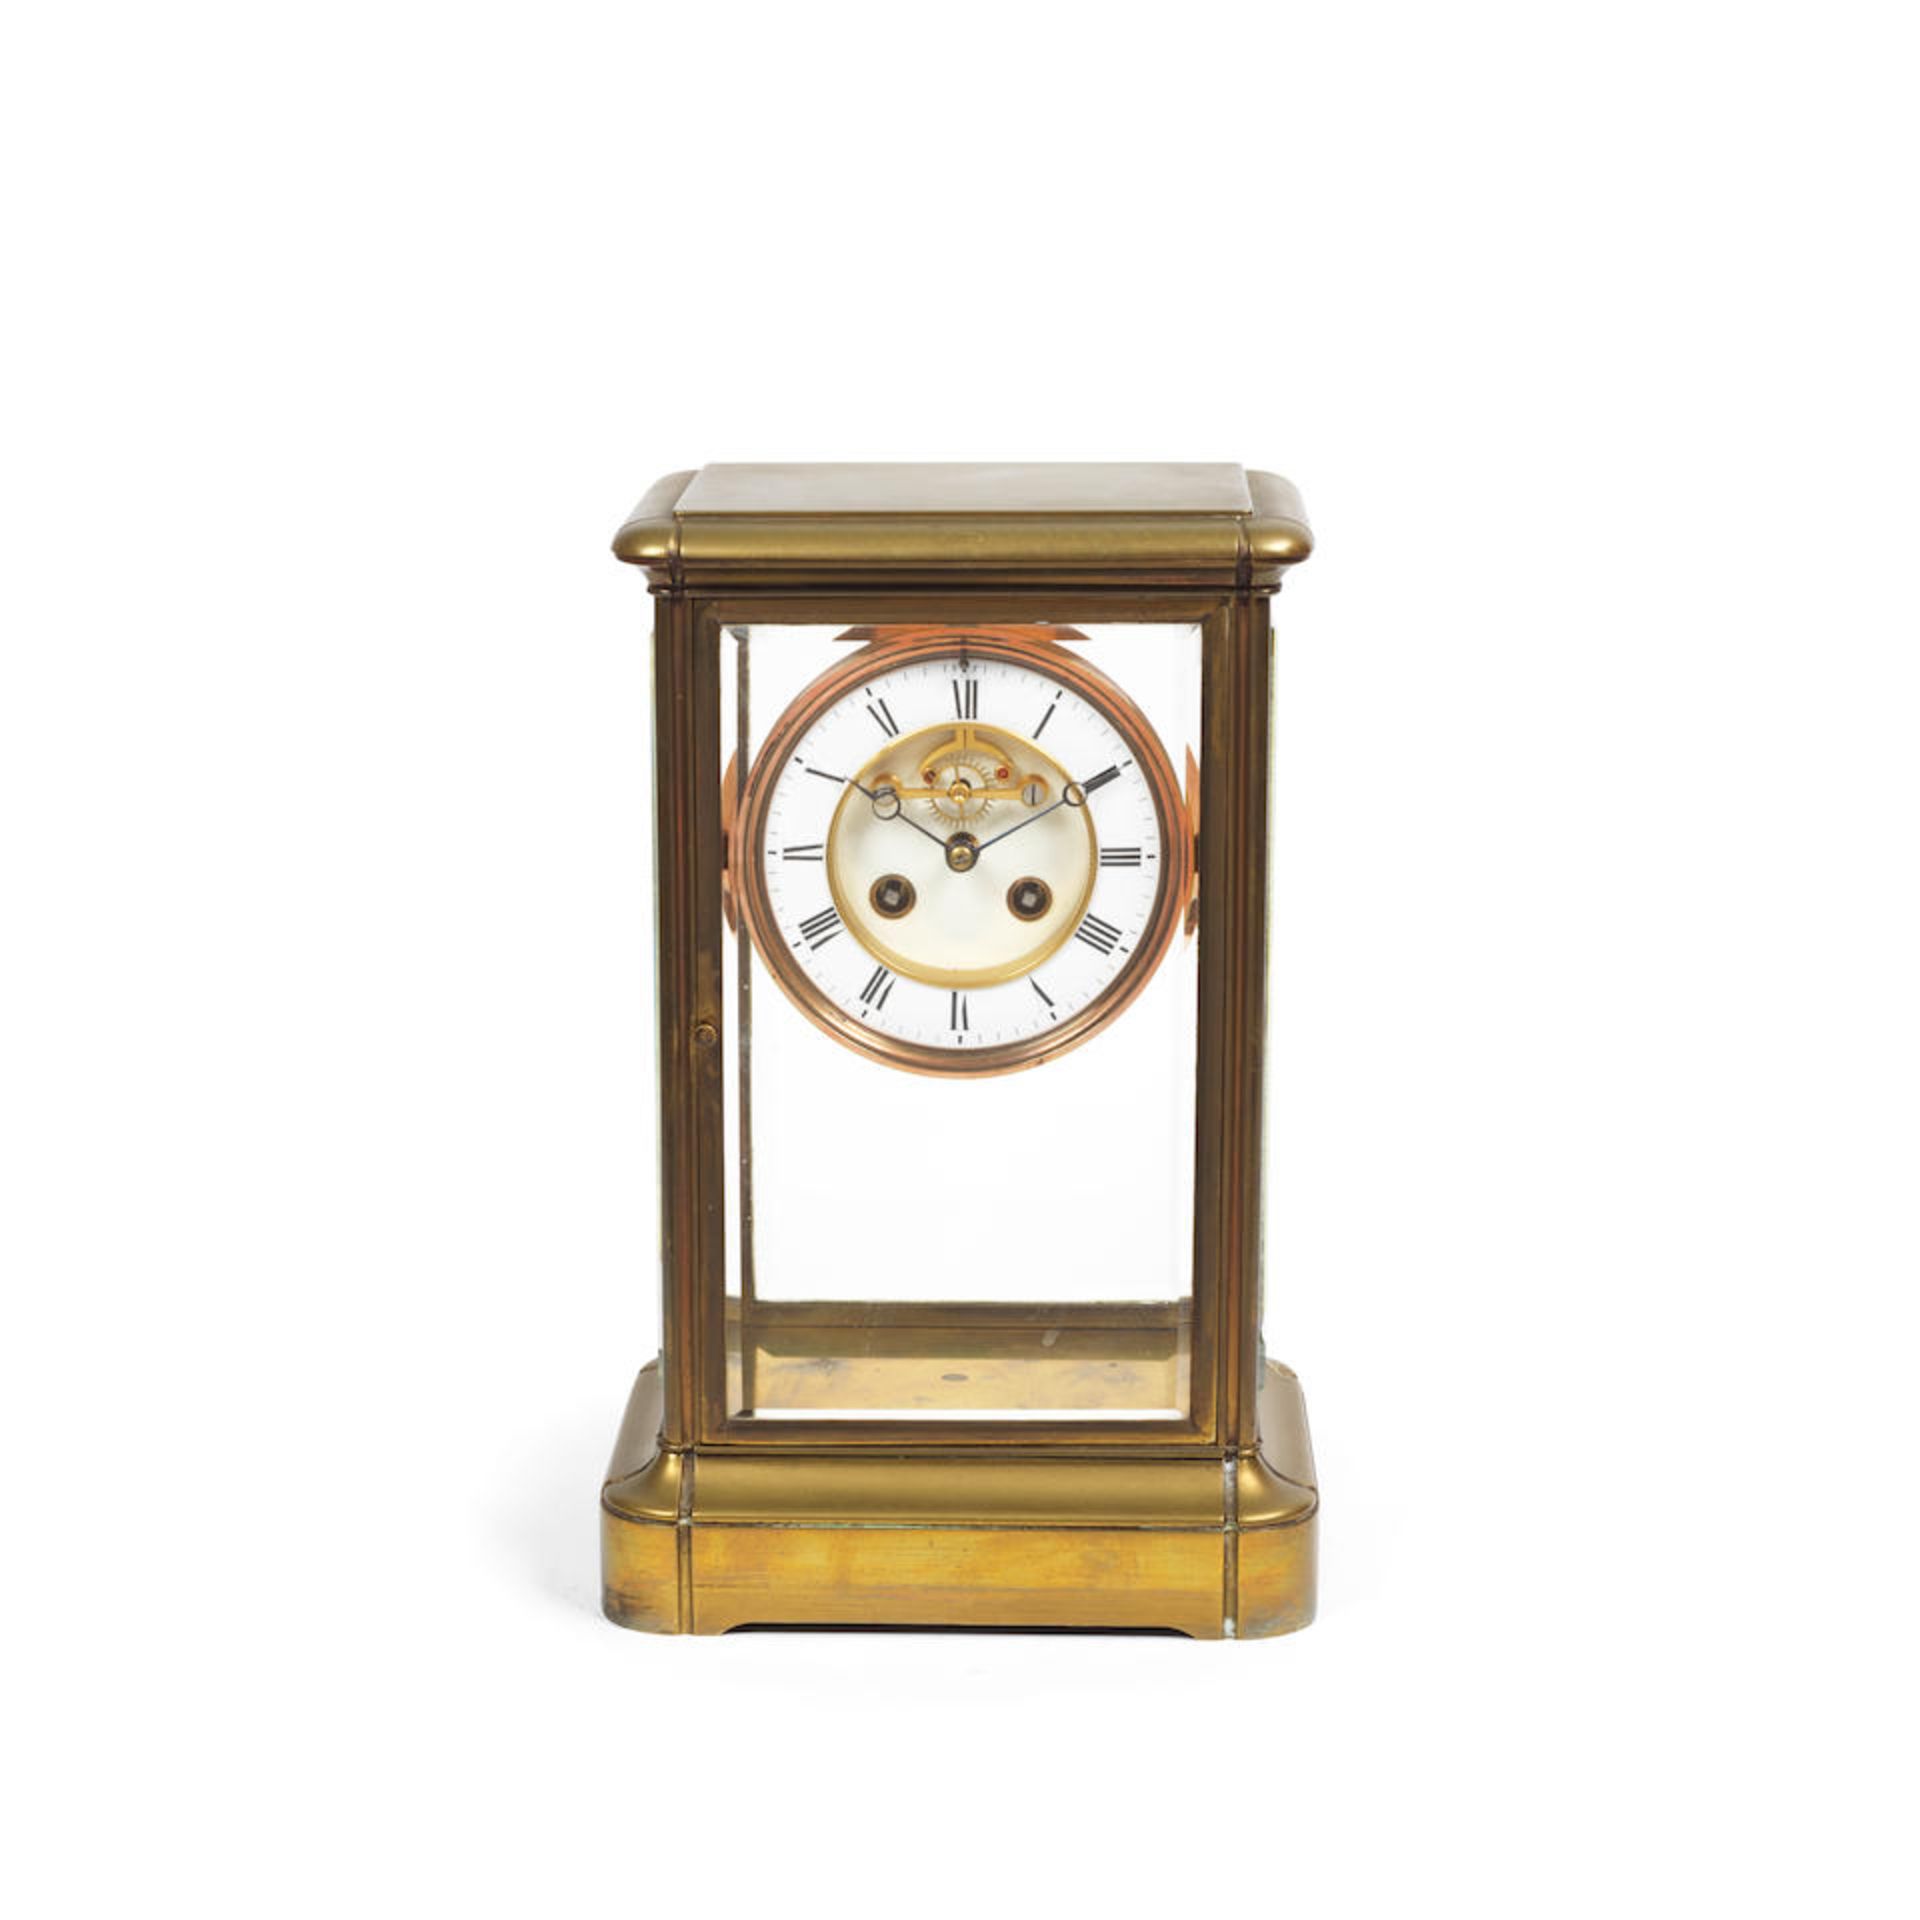 A late 19th/early 20th century French brass four glass clock the movement stamped A*B